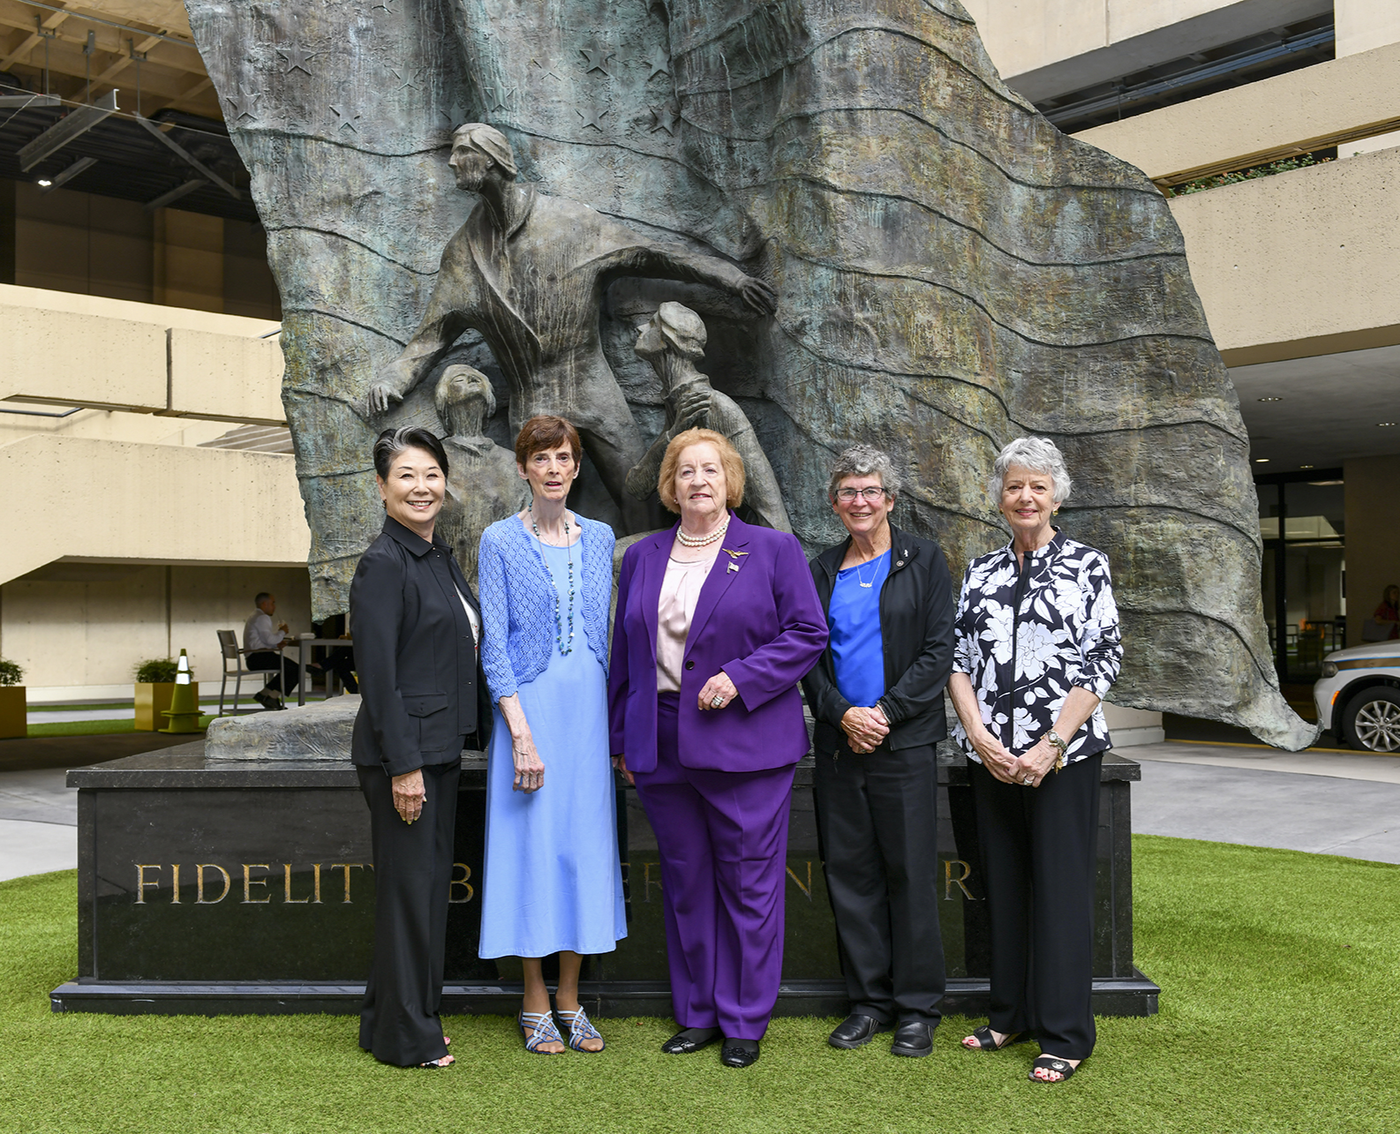 Some of the Bureau’s historic “firsts” gathered during a two-day celebration marking 50 years of female special agents in the FBI. From left: Jo Ann Sakato was the first Asian-American female agent. Joanne (Pierce) Misko and Sue (Roley) Malone were the first two women to attend the FBI Academy. Kathy Adams was the first female SWAT team leader and Christine Jung was the first female firearms instructor.